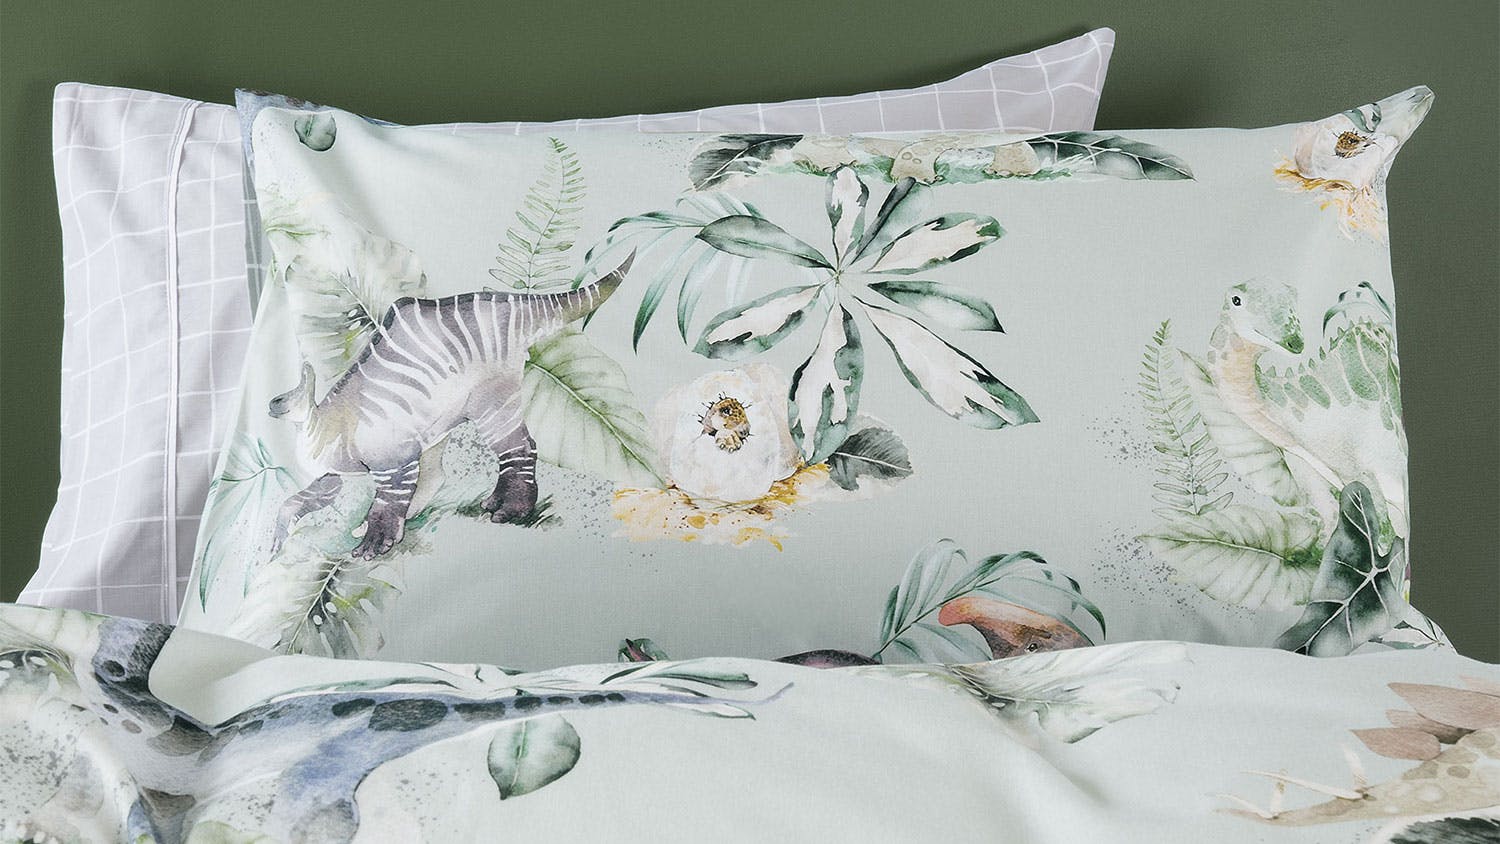 Dino Jungle Duvet Cover Set by Squiggles - Double